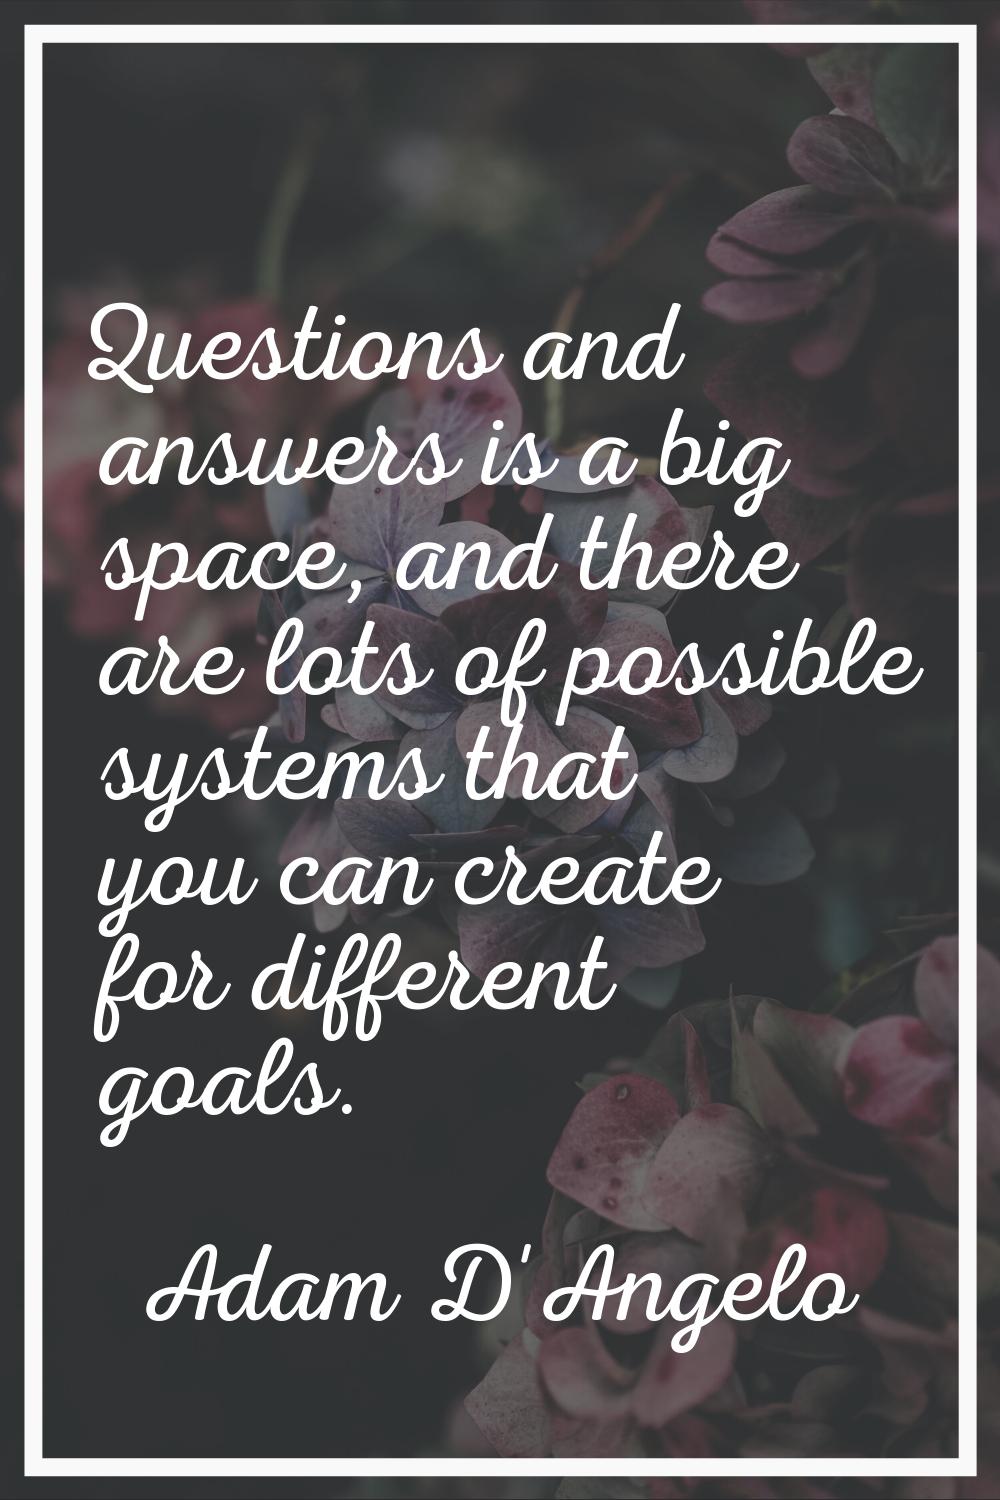 Questions and answers is a big space, and there are lots of possible systems that you can create fo